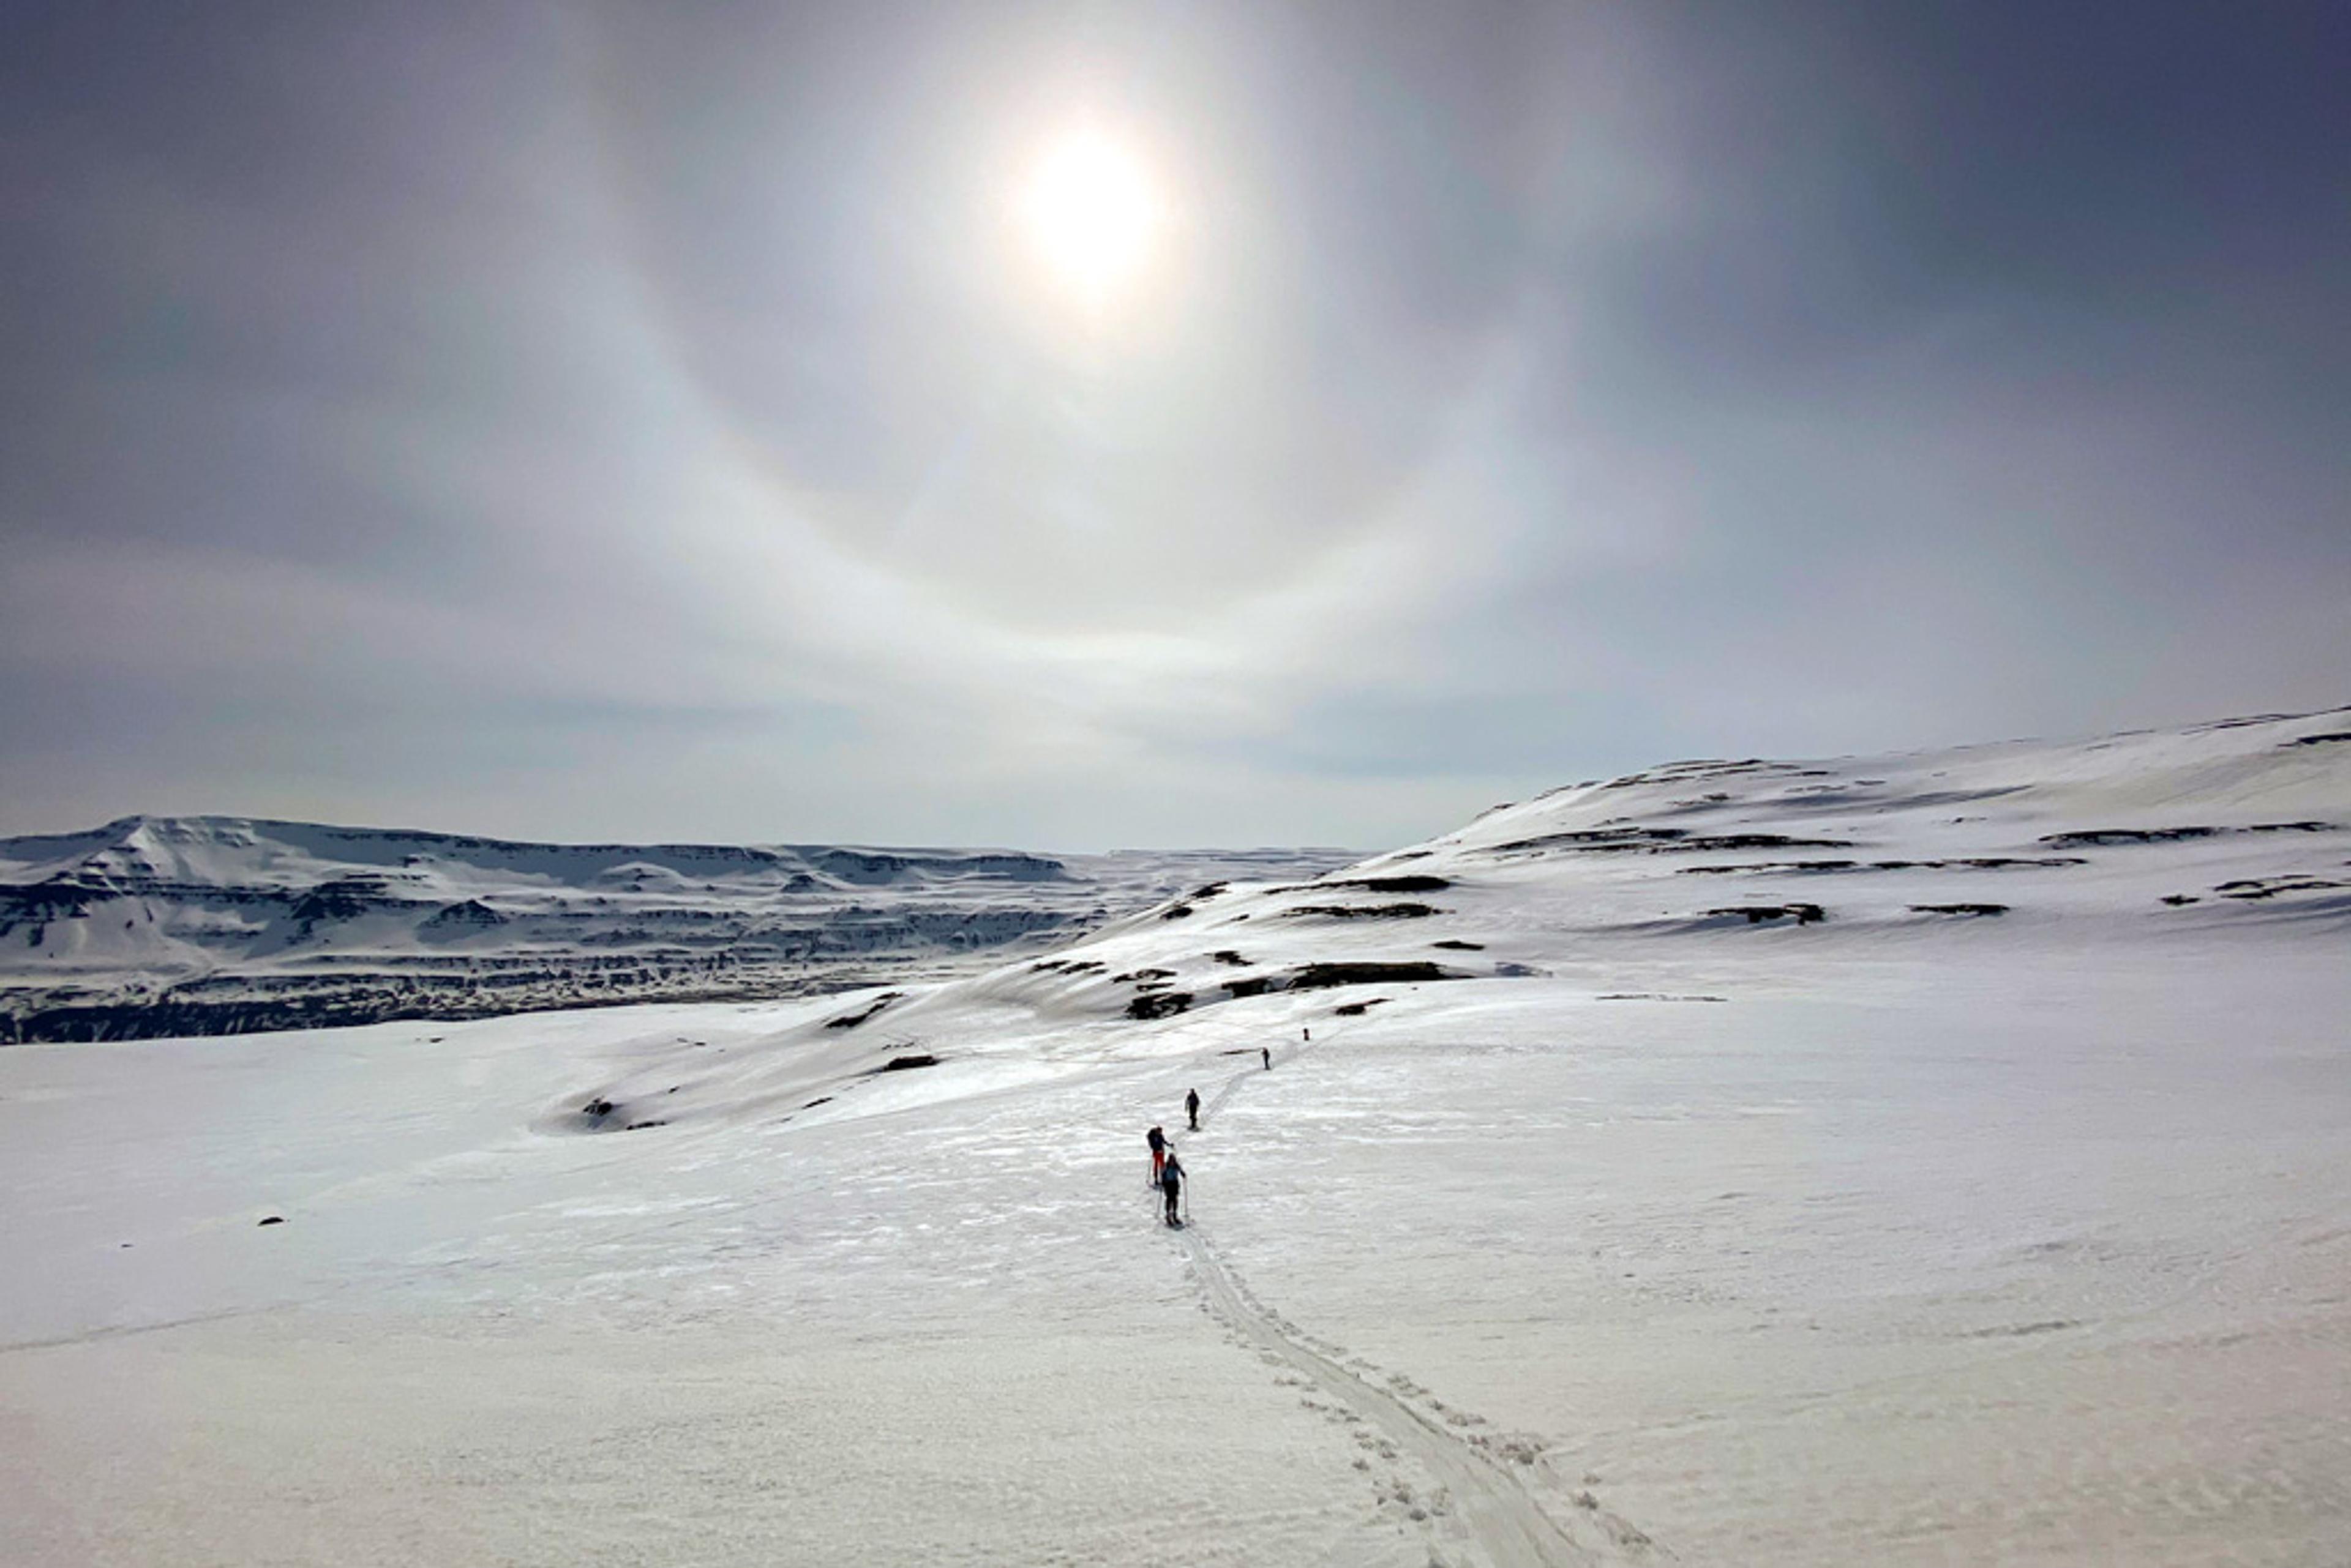 Ski-tourers gracefully traversing a vast snowfield, bathed in radiant sunlight.